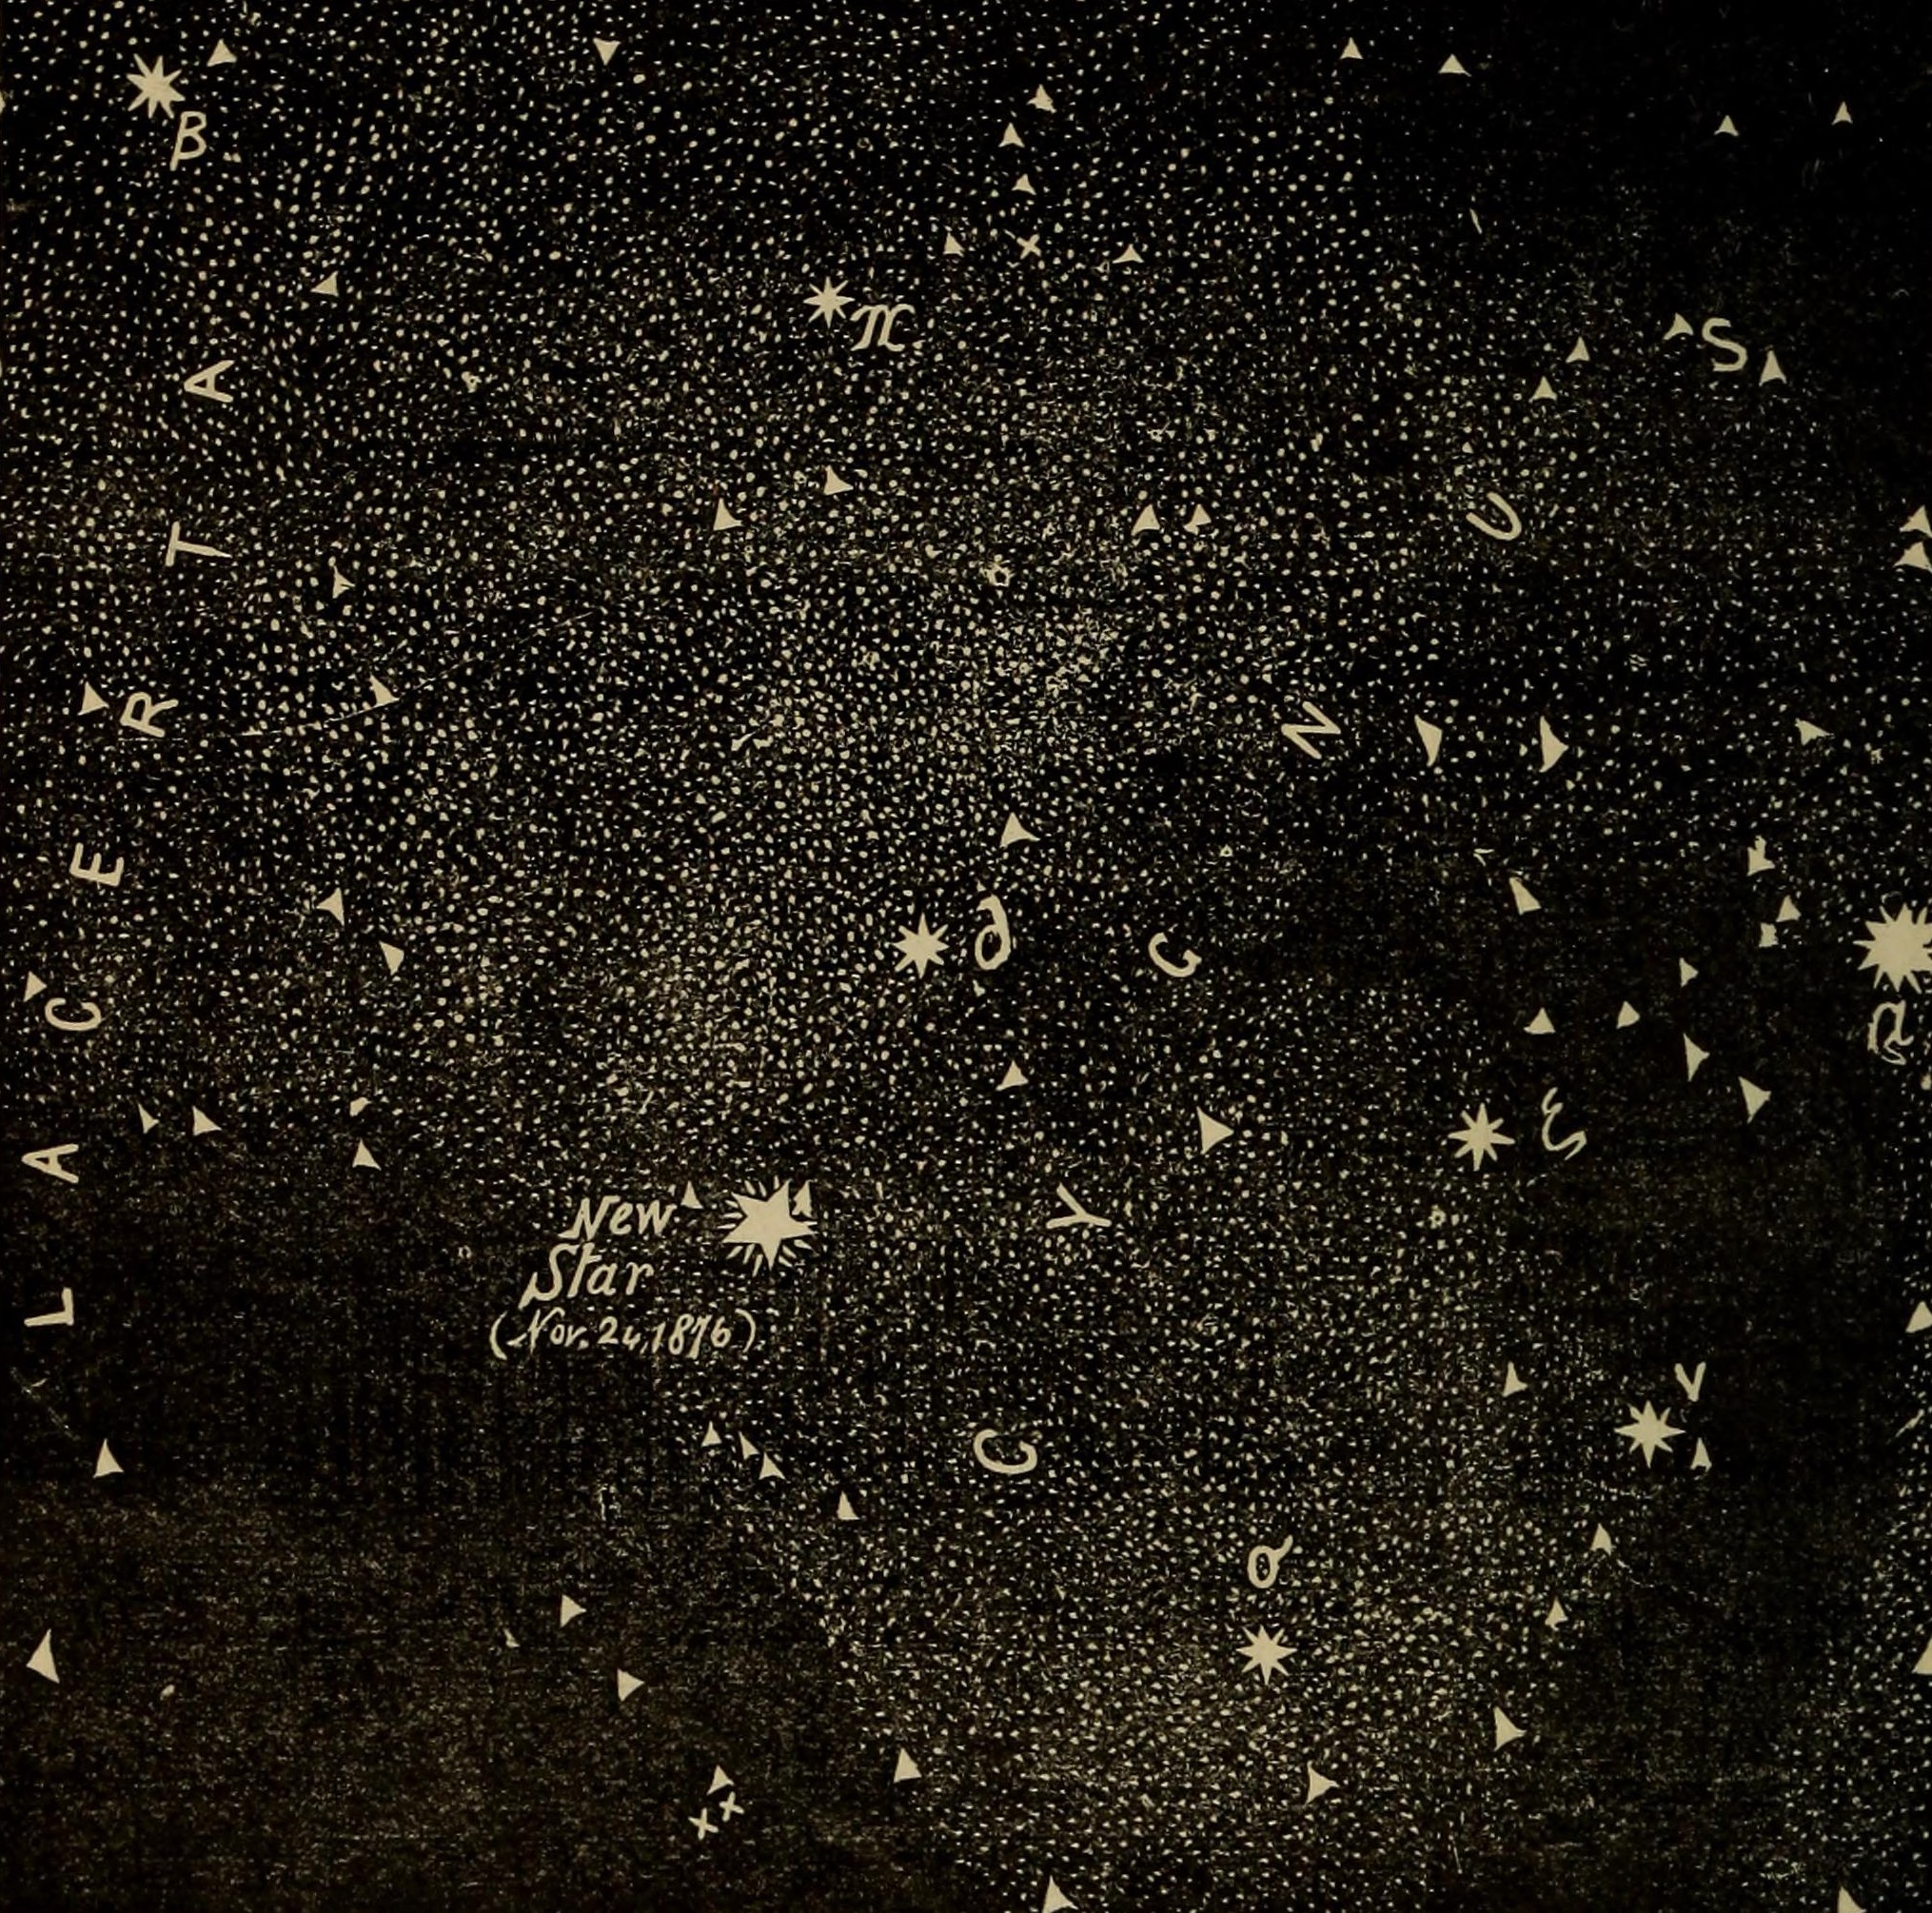 Part of Cygnus showing the location of a new star (November 24th 1876) Flowers of the Sky by Richard A. Proctor (1879)